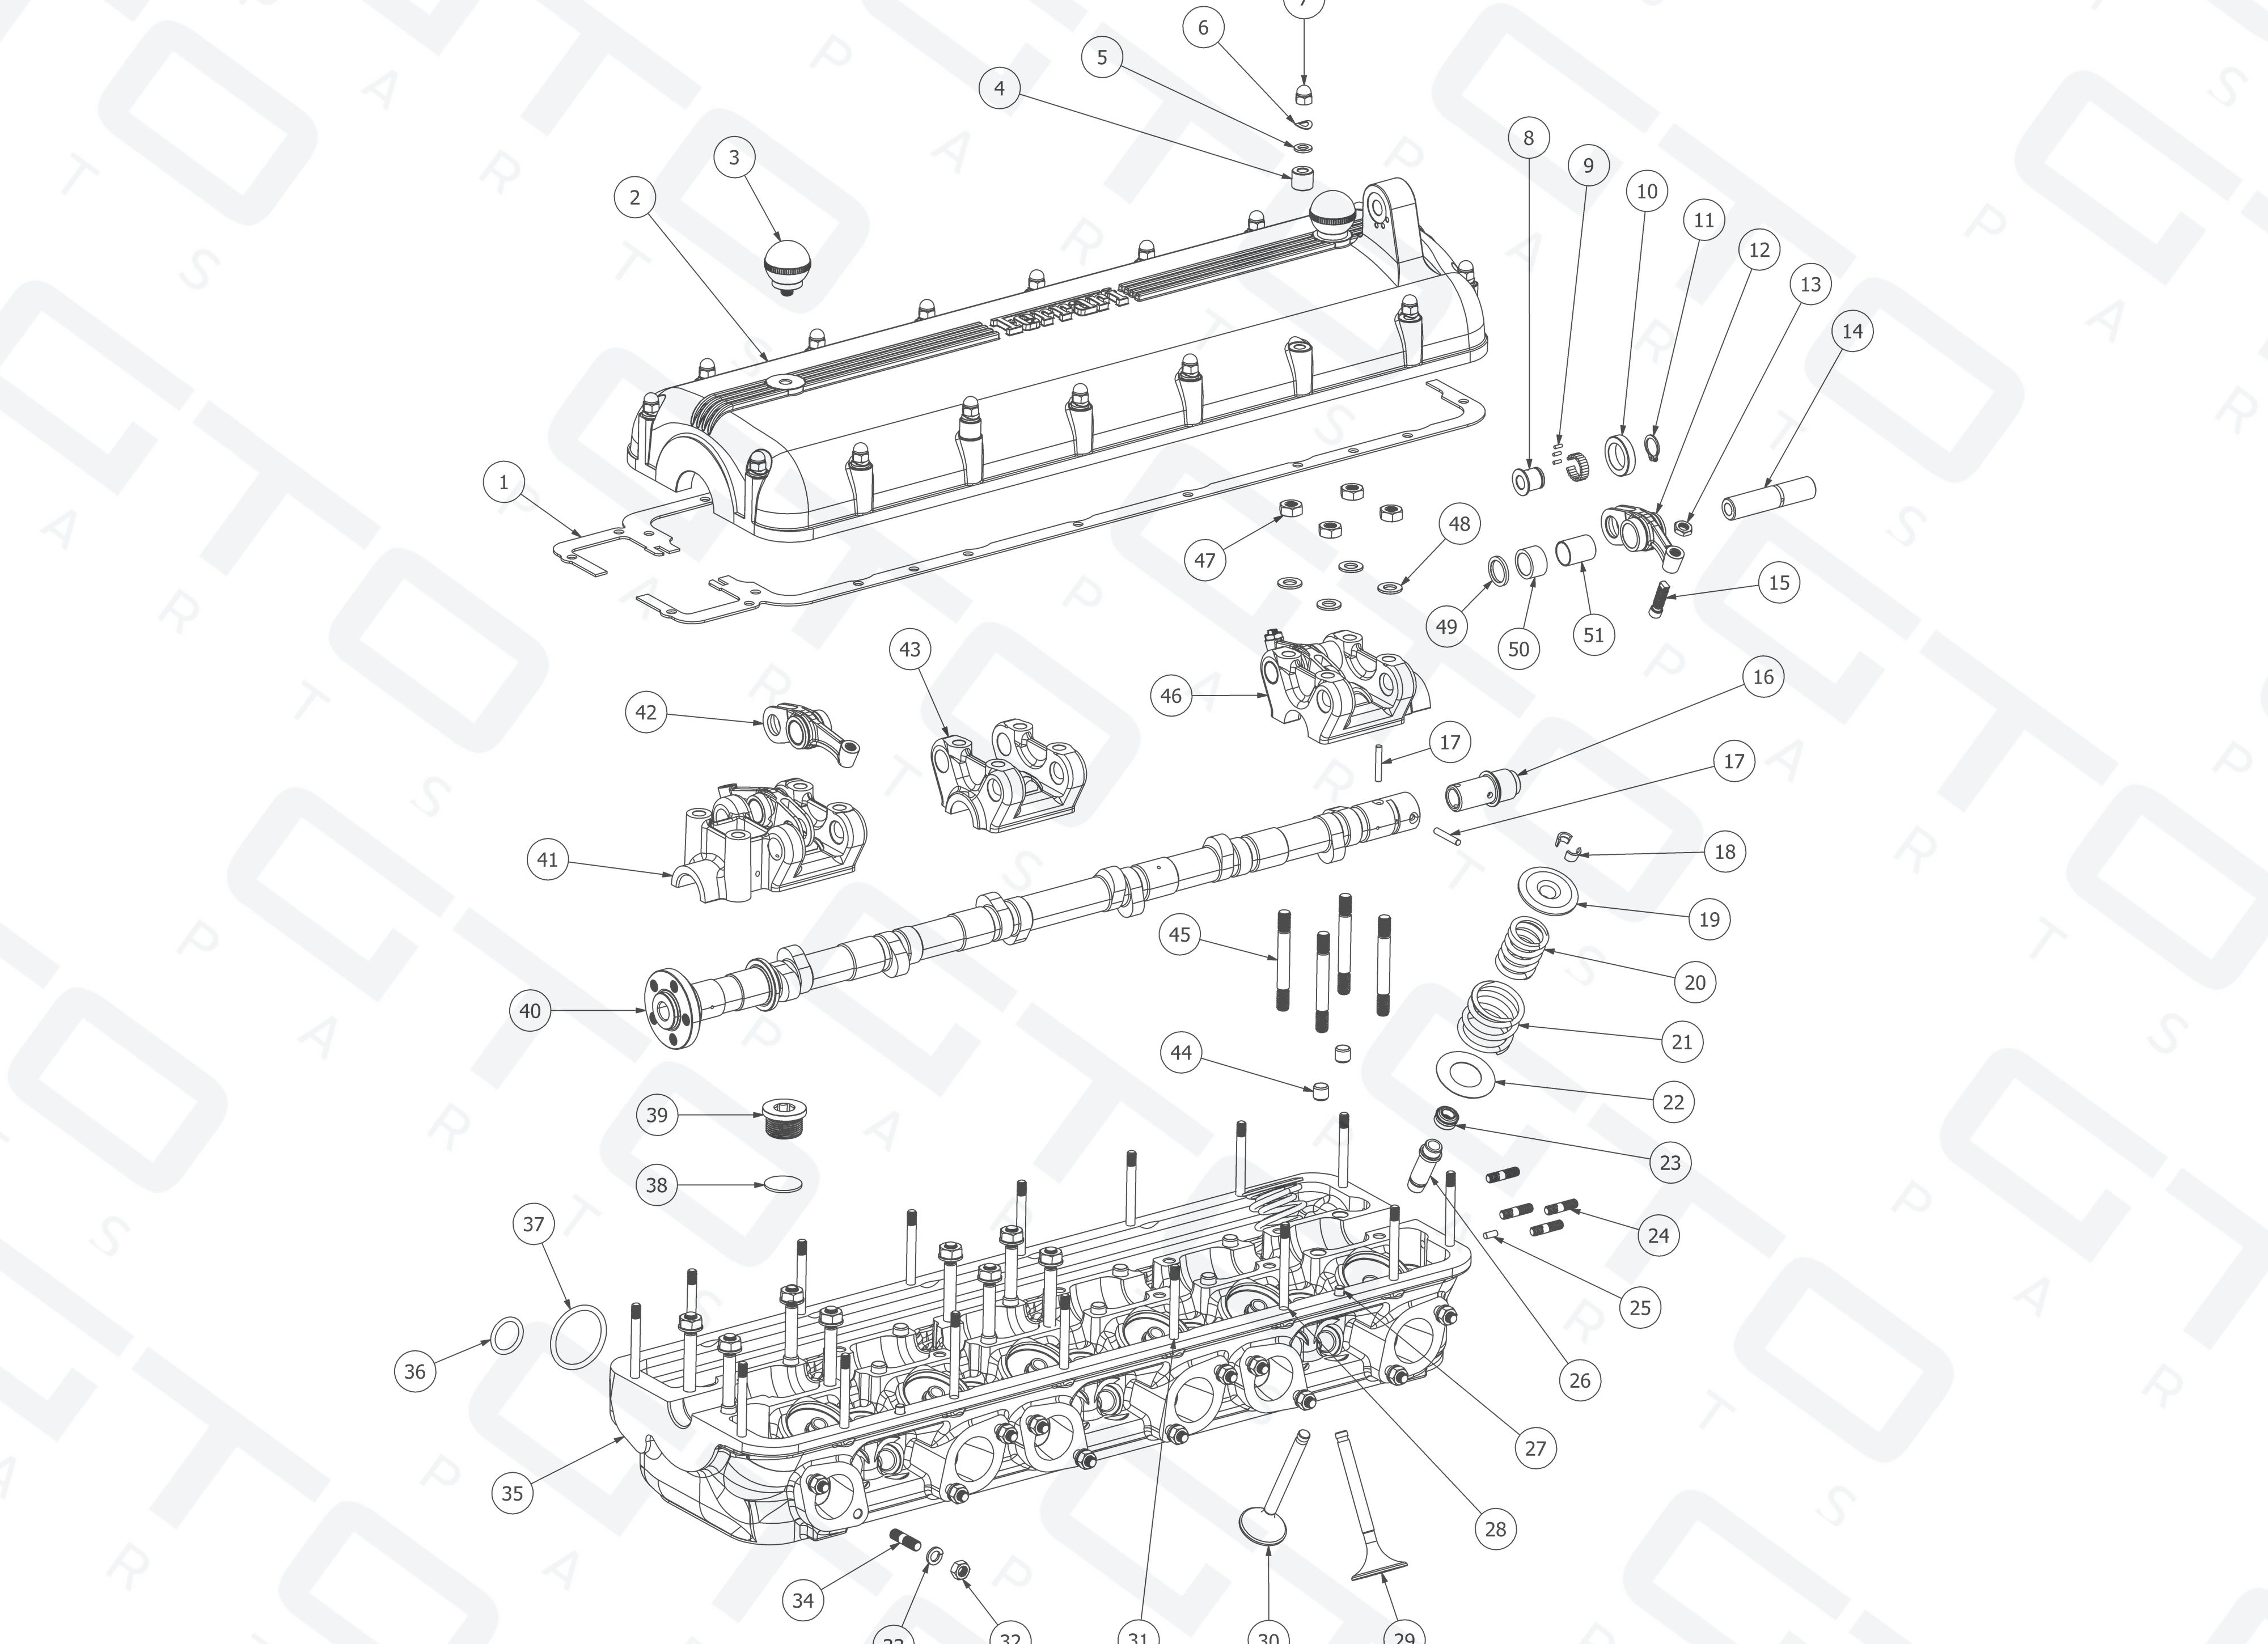 Schematic: Cylinder Head Assembly